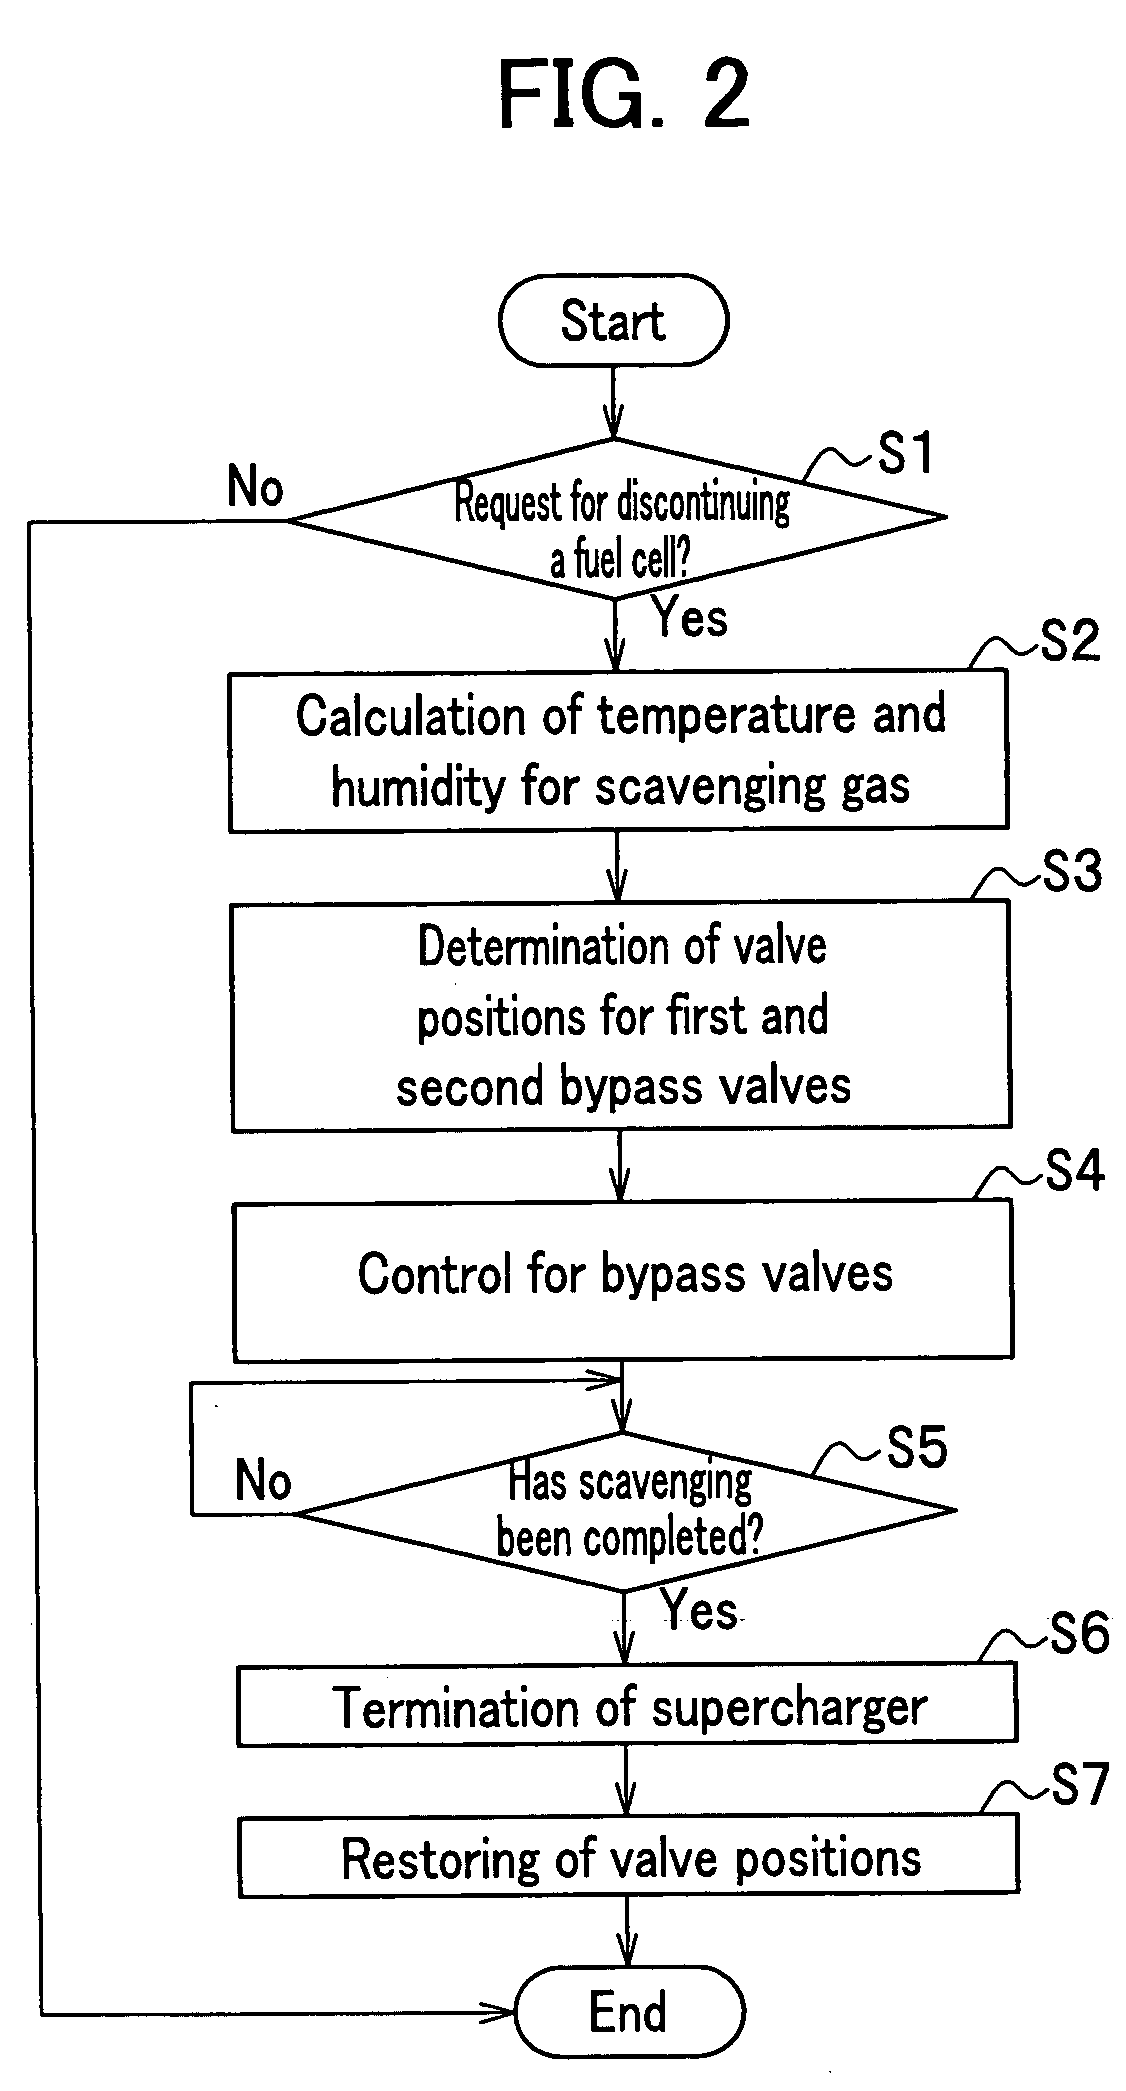 Fuel cell system and method of discontinuing same